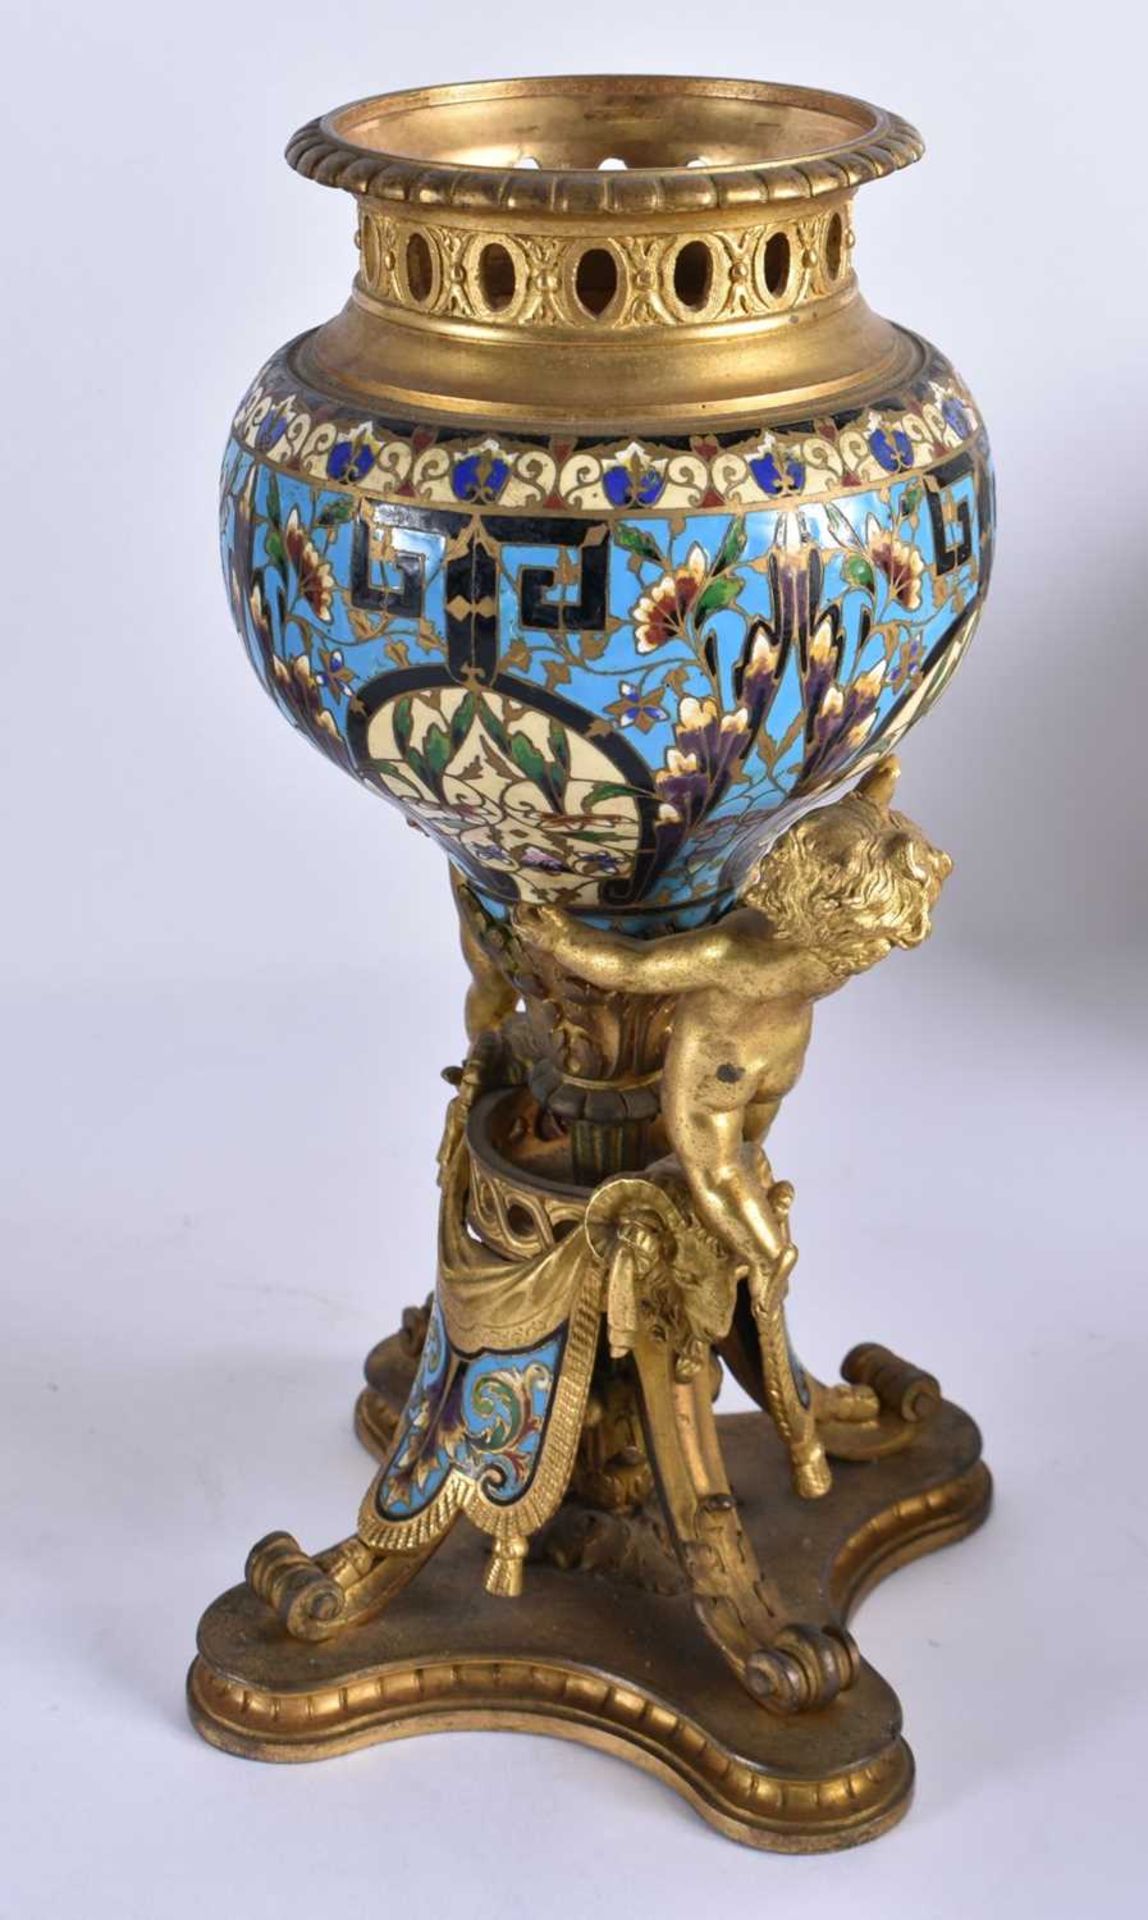 A FINE 19TH CENTURY FRENCH ORMOLU AND CHAMPLEVE ENAMEL CLOCK GARNITURE formed with putti amongst - Image 6 of 9